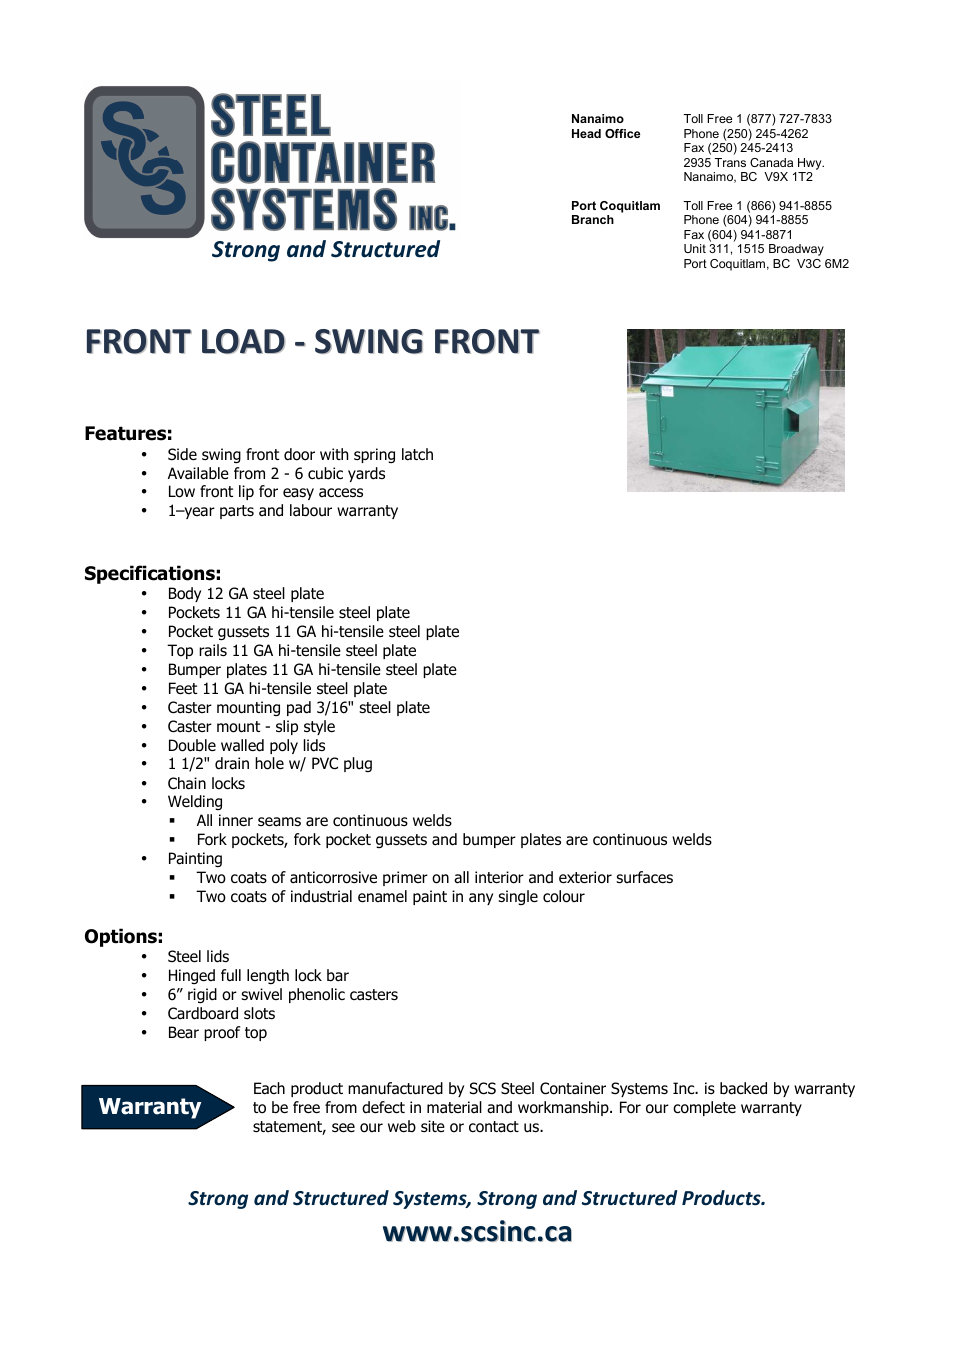 FRONT LOAD - SWING FRONT